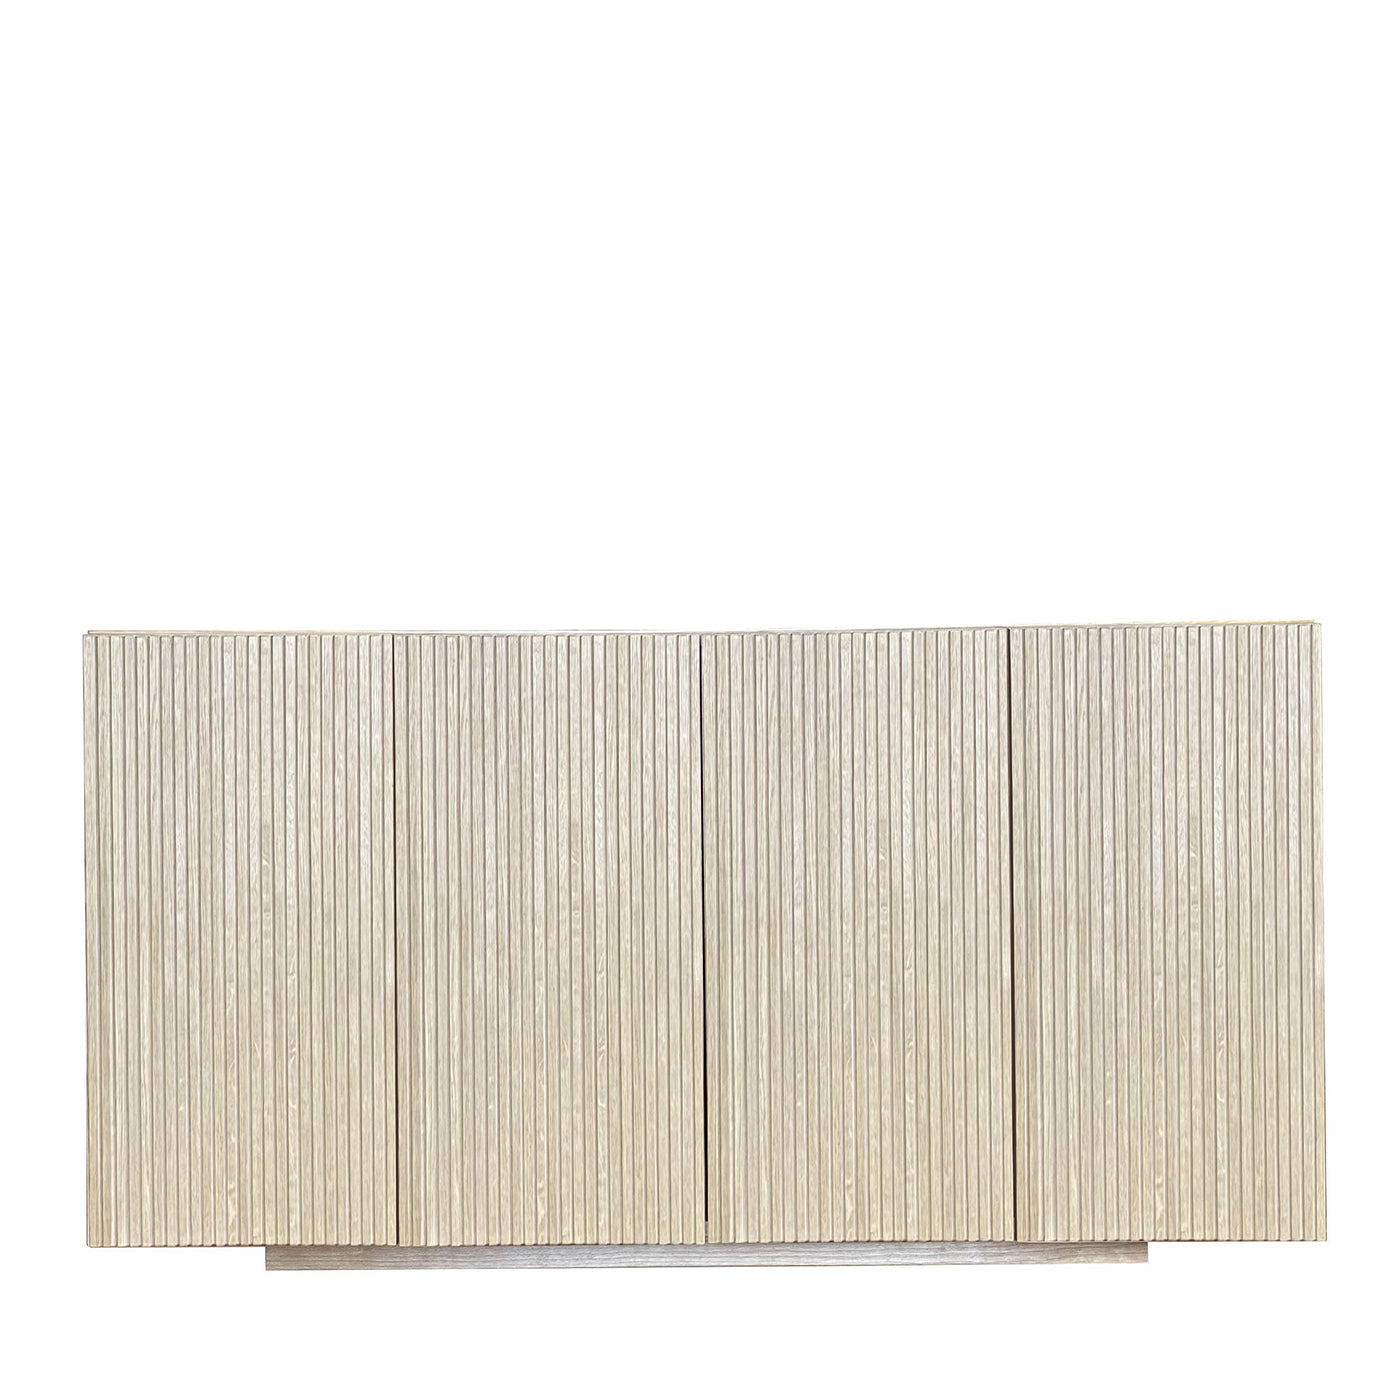 Boccadarno Nove 4-Door Grooved Sideboard by Meccani Studio - Main view